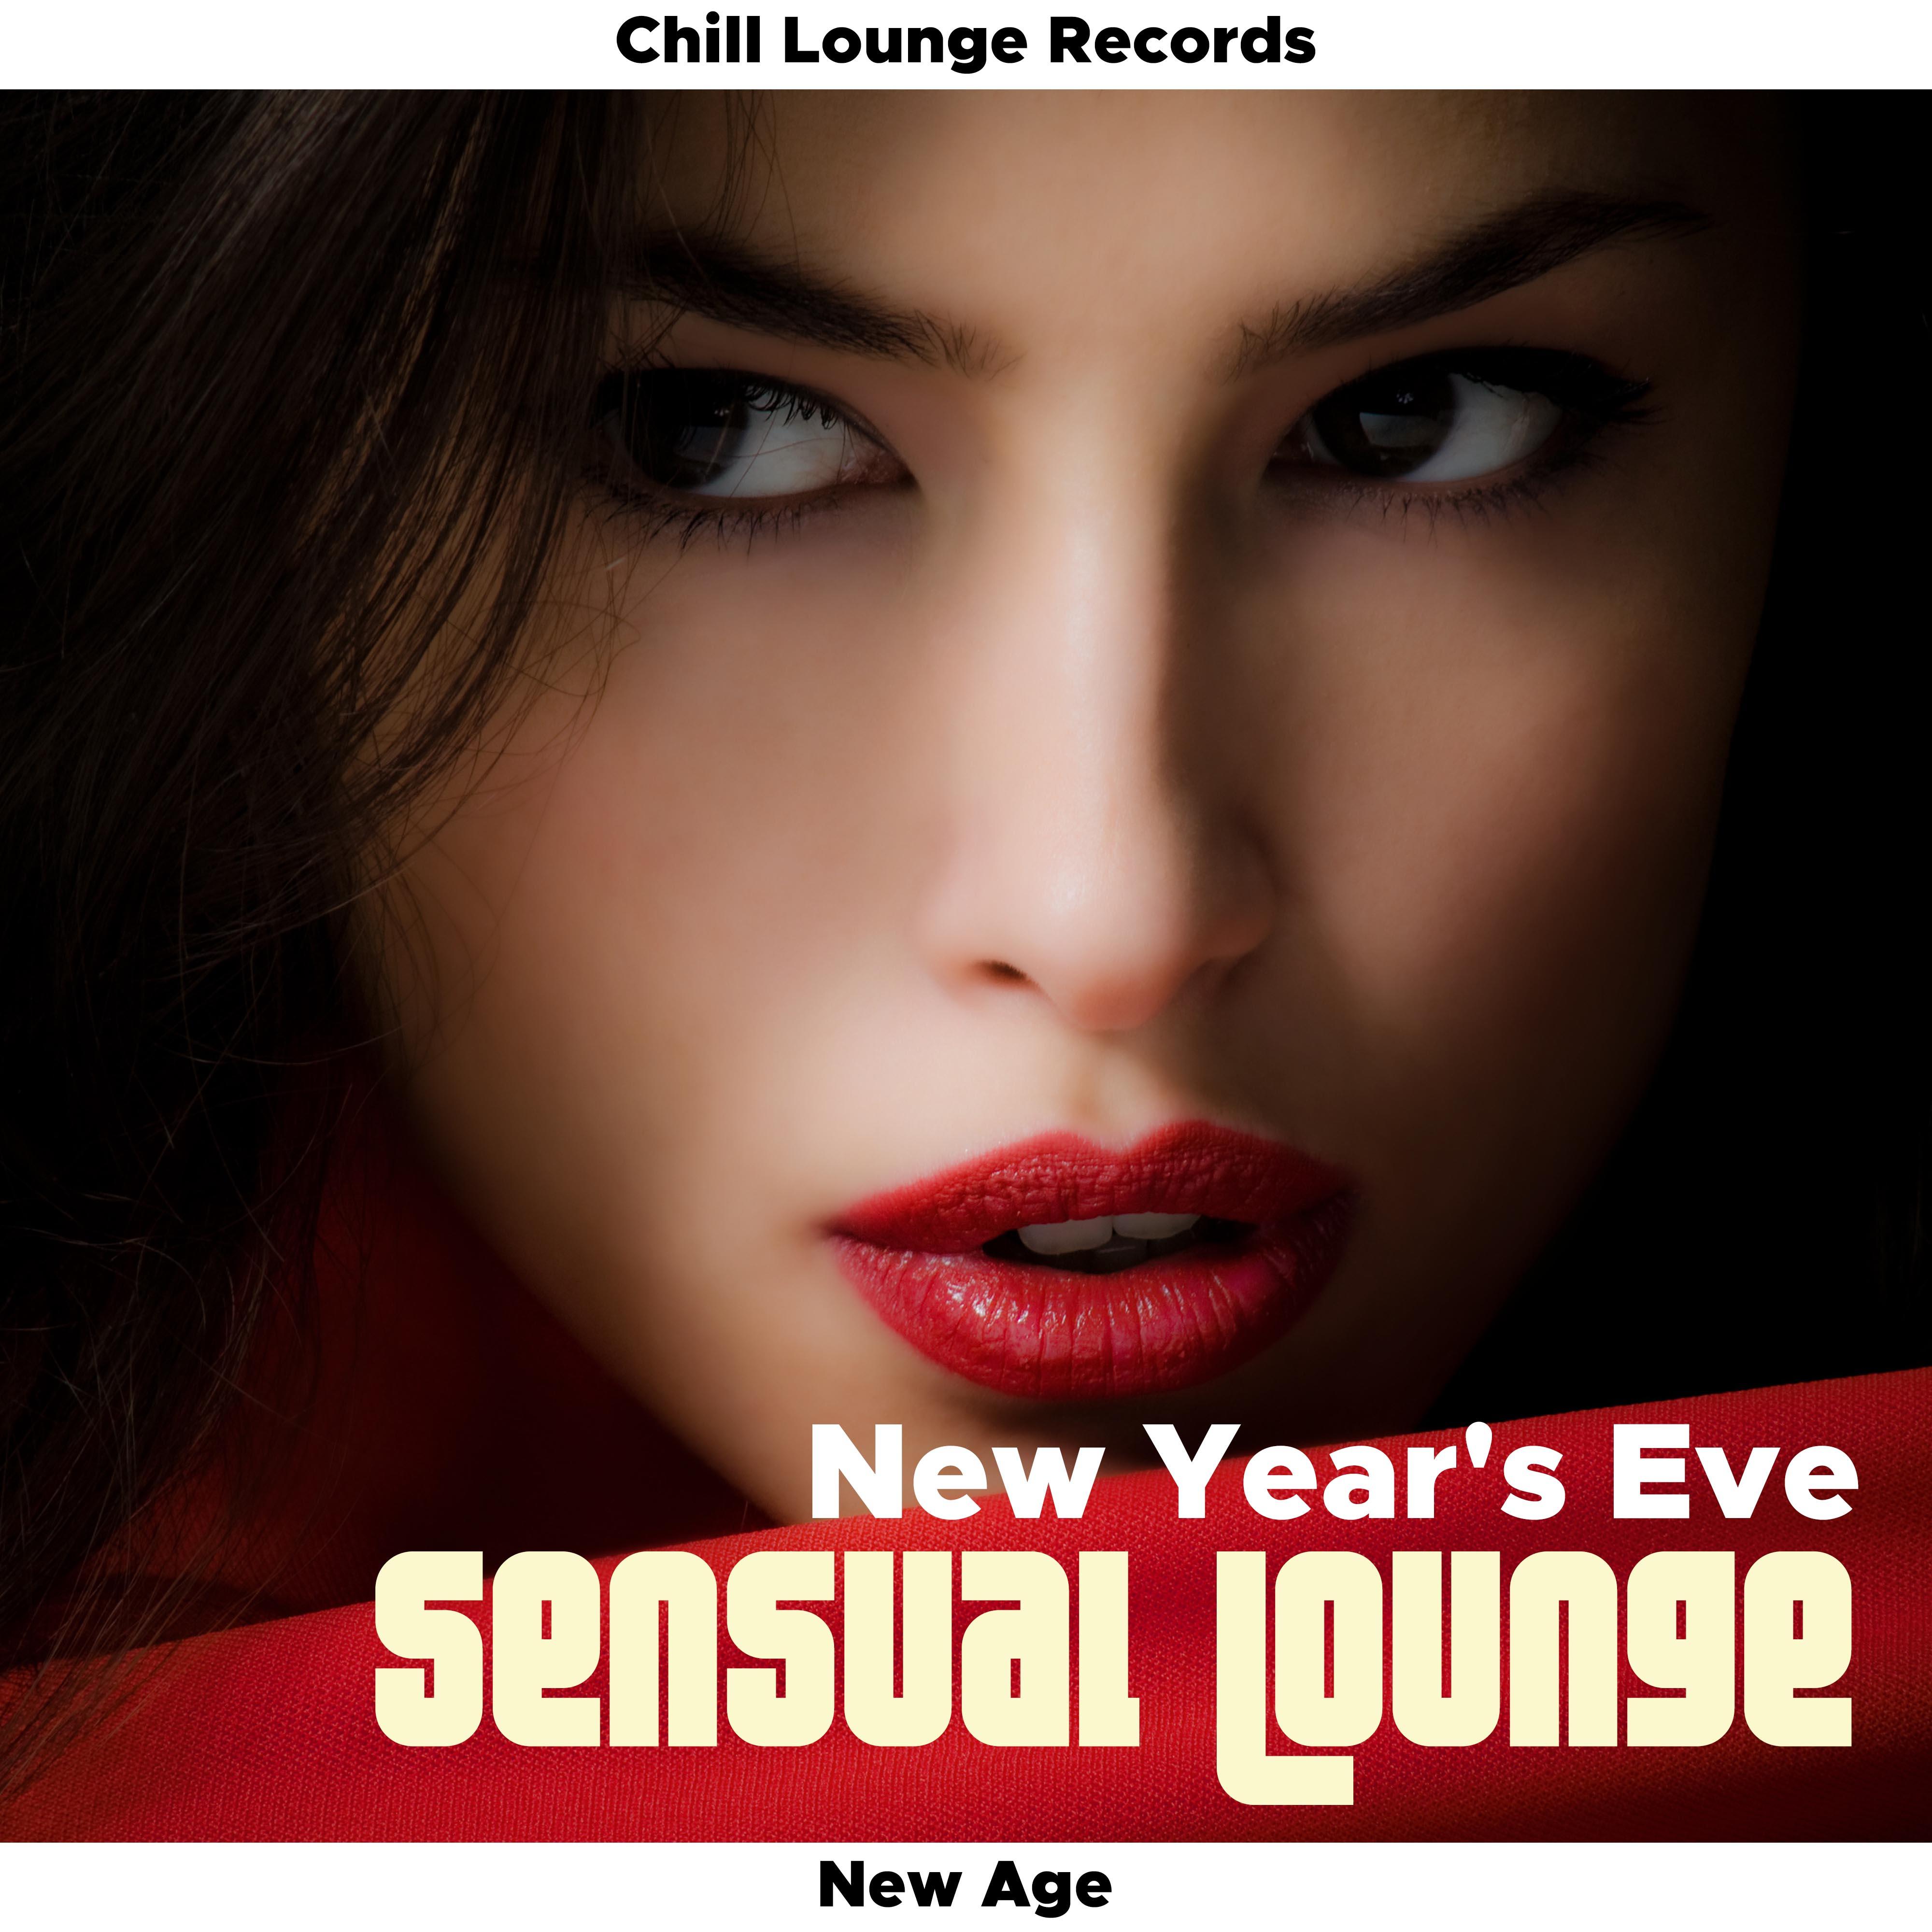 New Year' s Eve Sensual Lounge Collection  Chill Lounge Bar New Year 2017 Private Party Songs